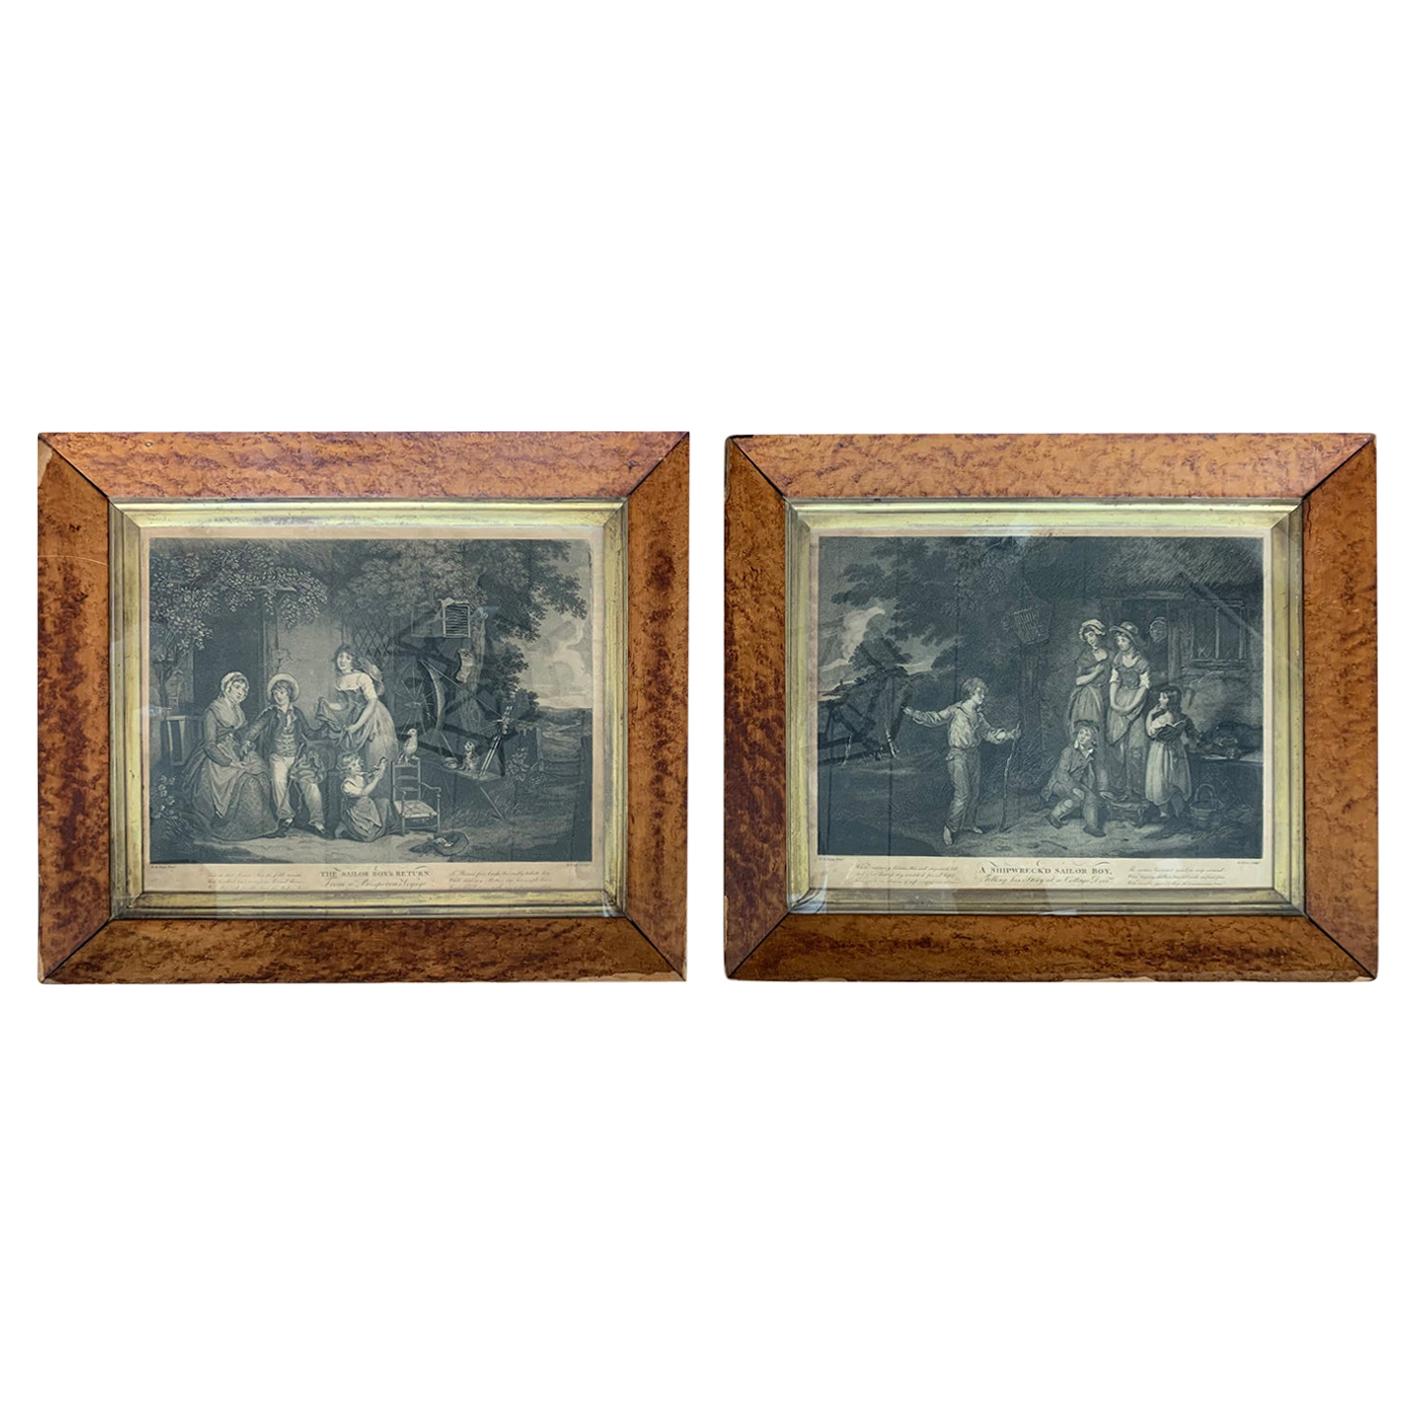 Pair of Framed English Engravings of Sailor Boys by Edward Orme, circa 1790-1800 For Sale